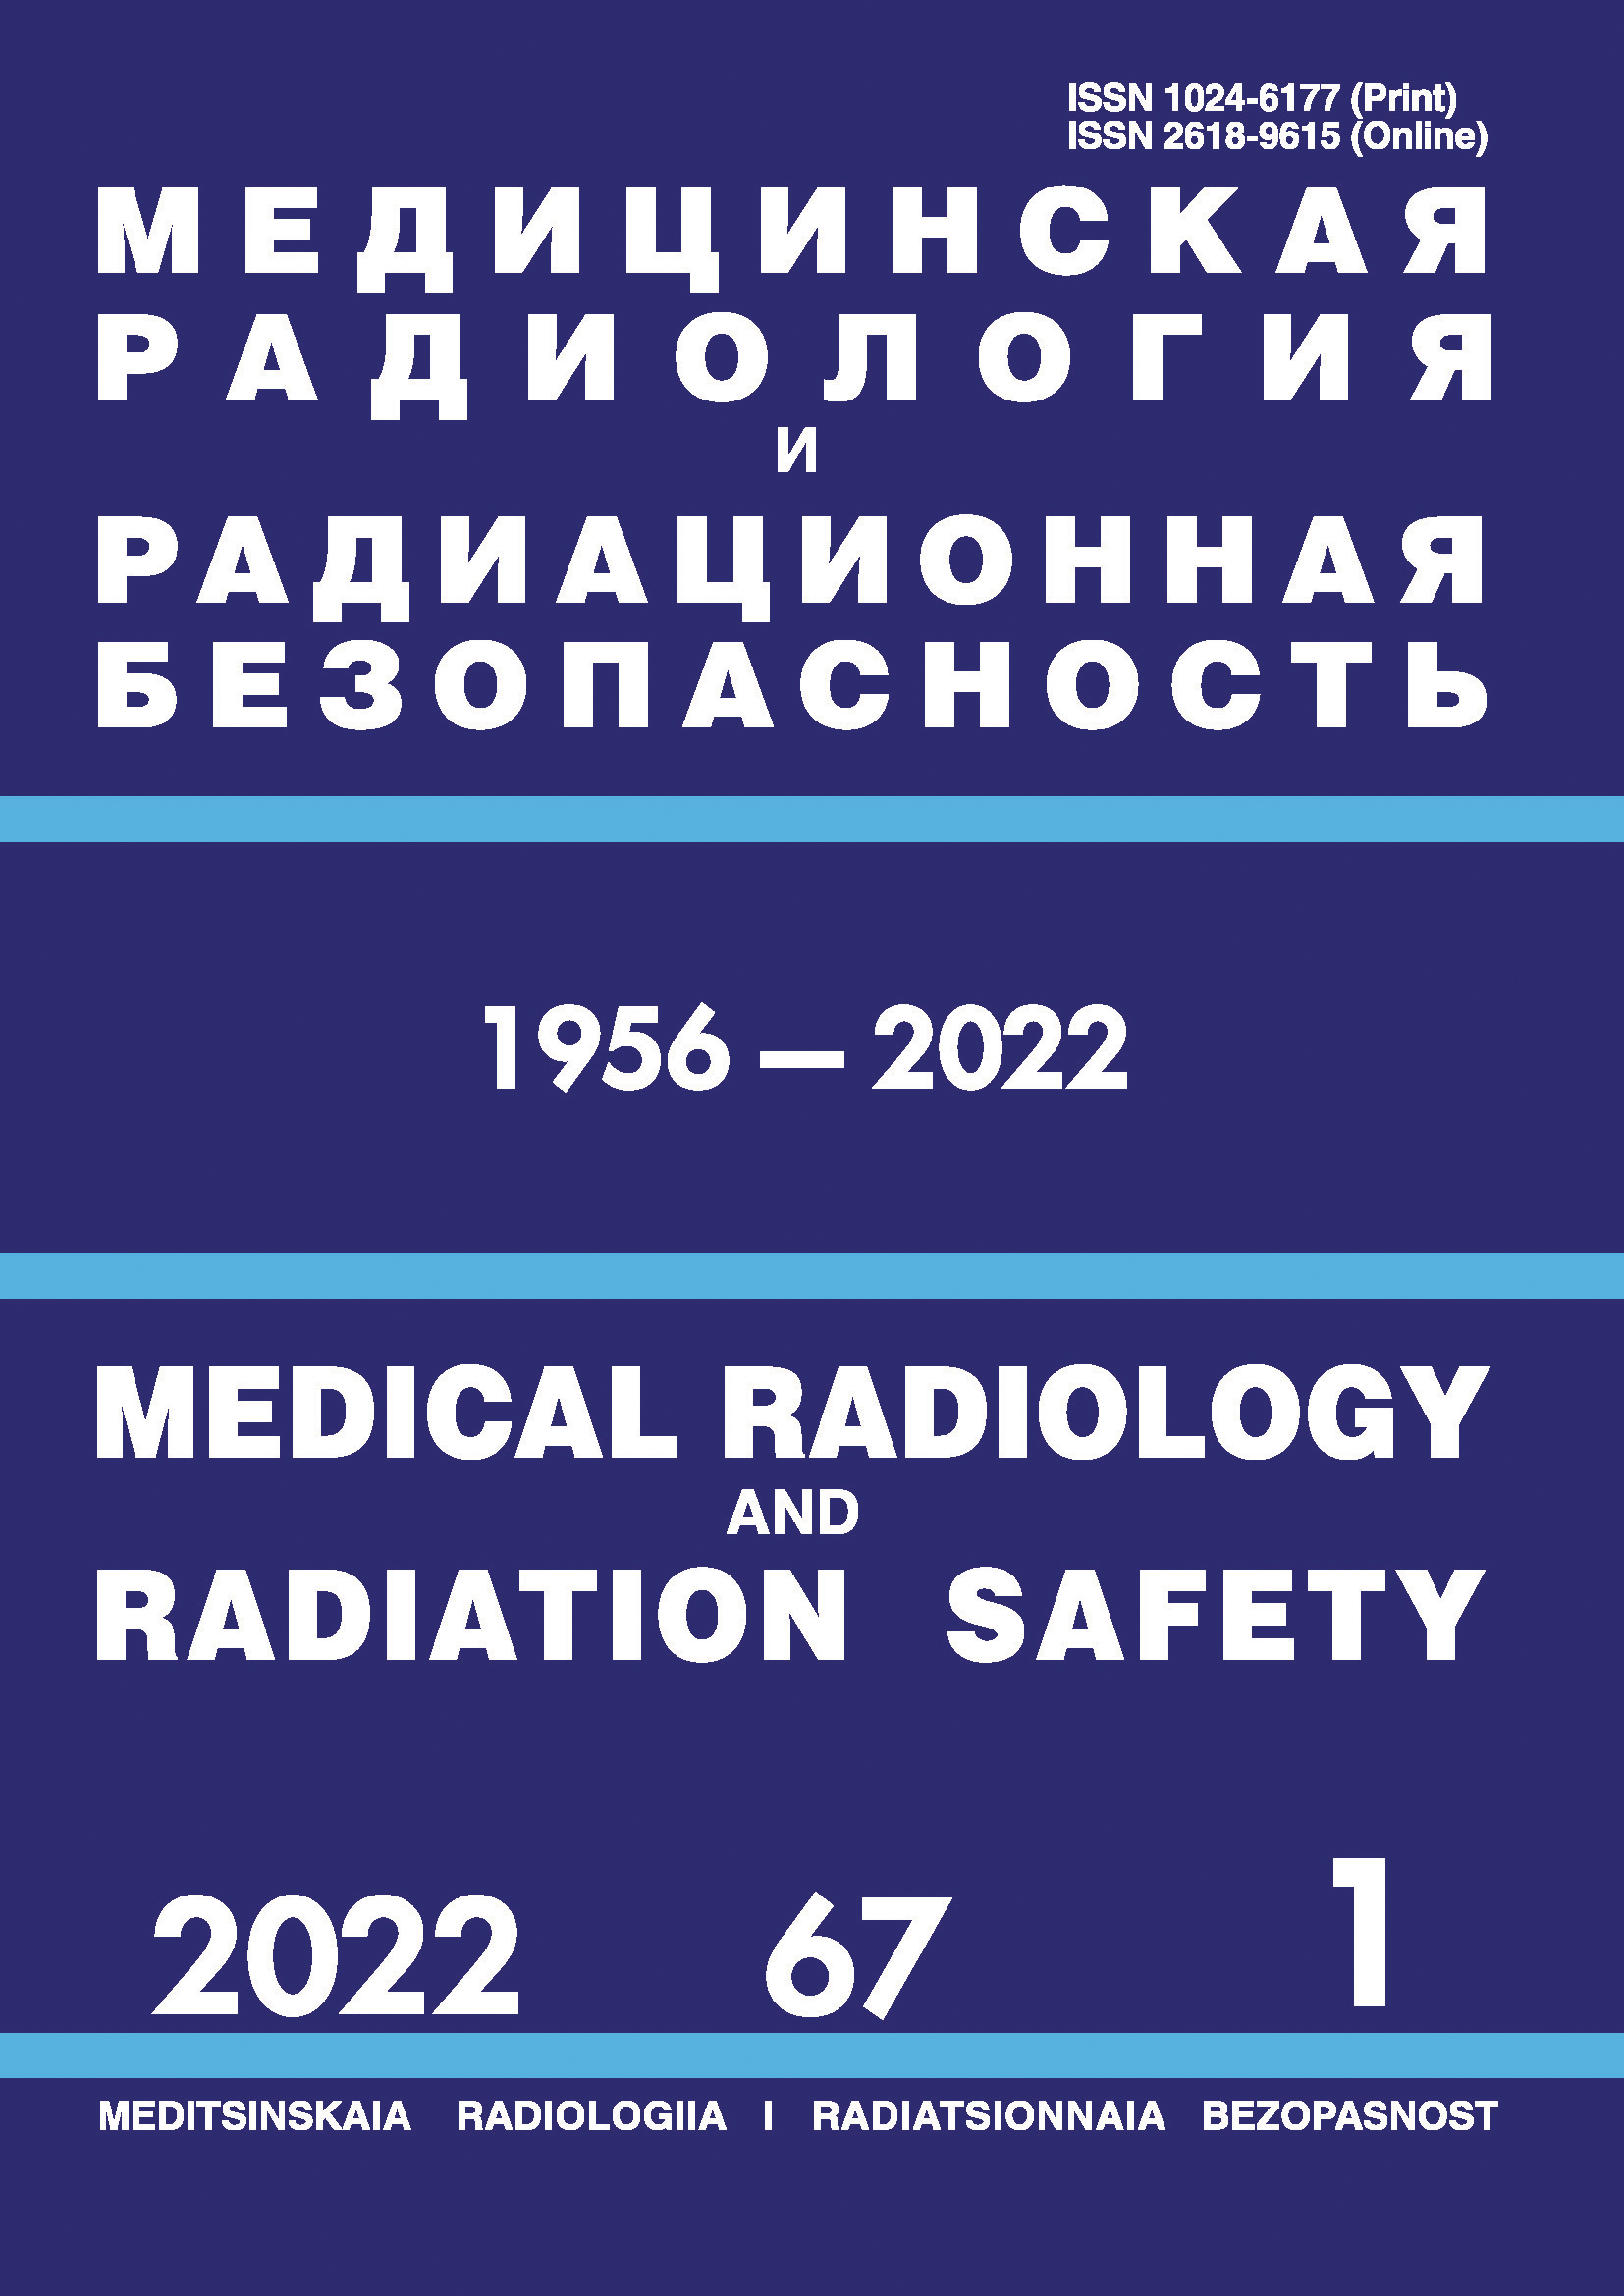                         Reference and Information Complex REGISTR  of the Urals Research Center for Radiation Medicine of the FMBA of Russia
            